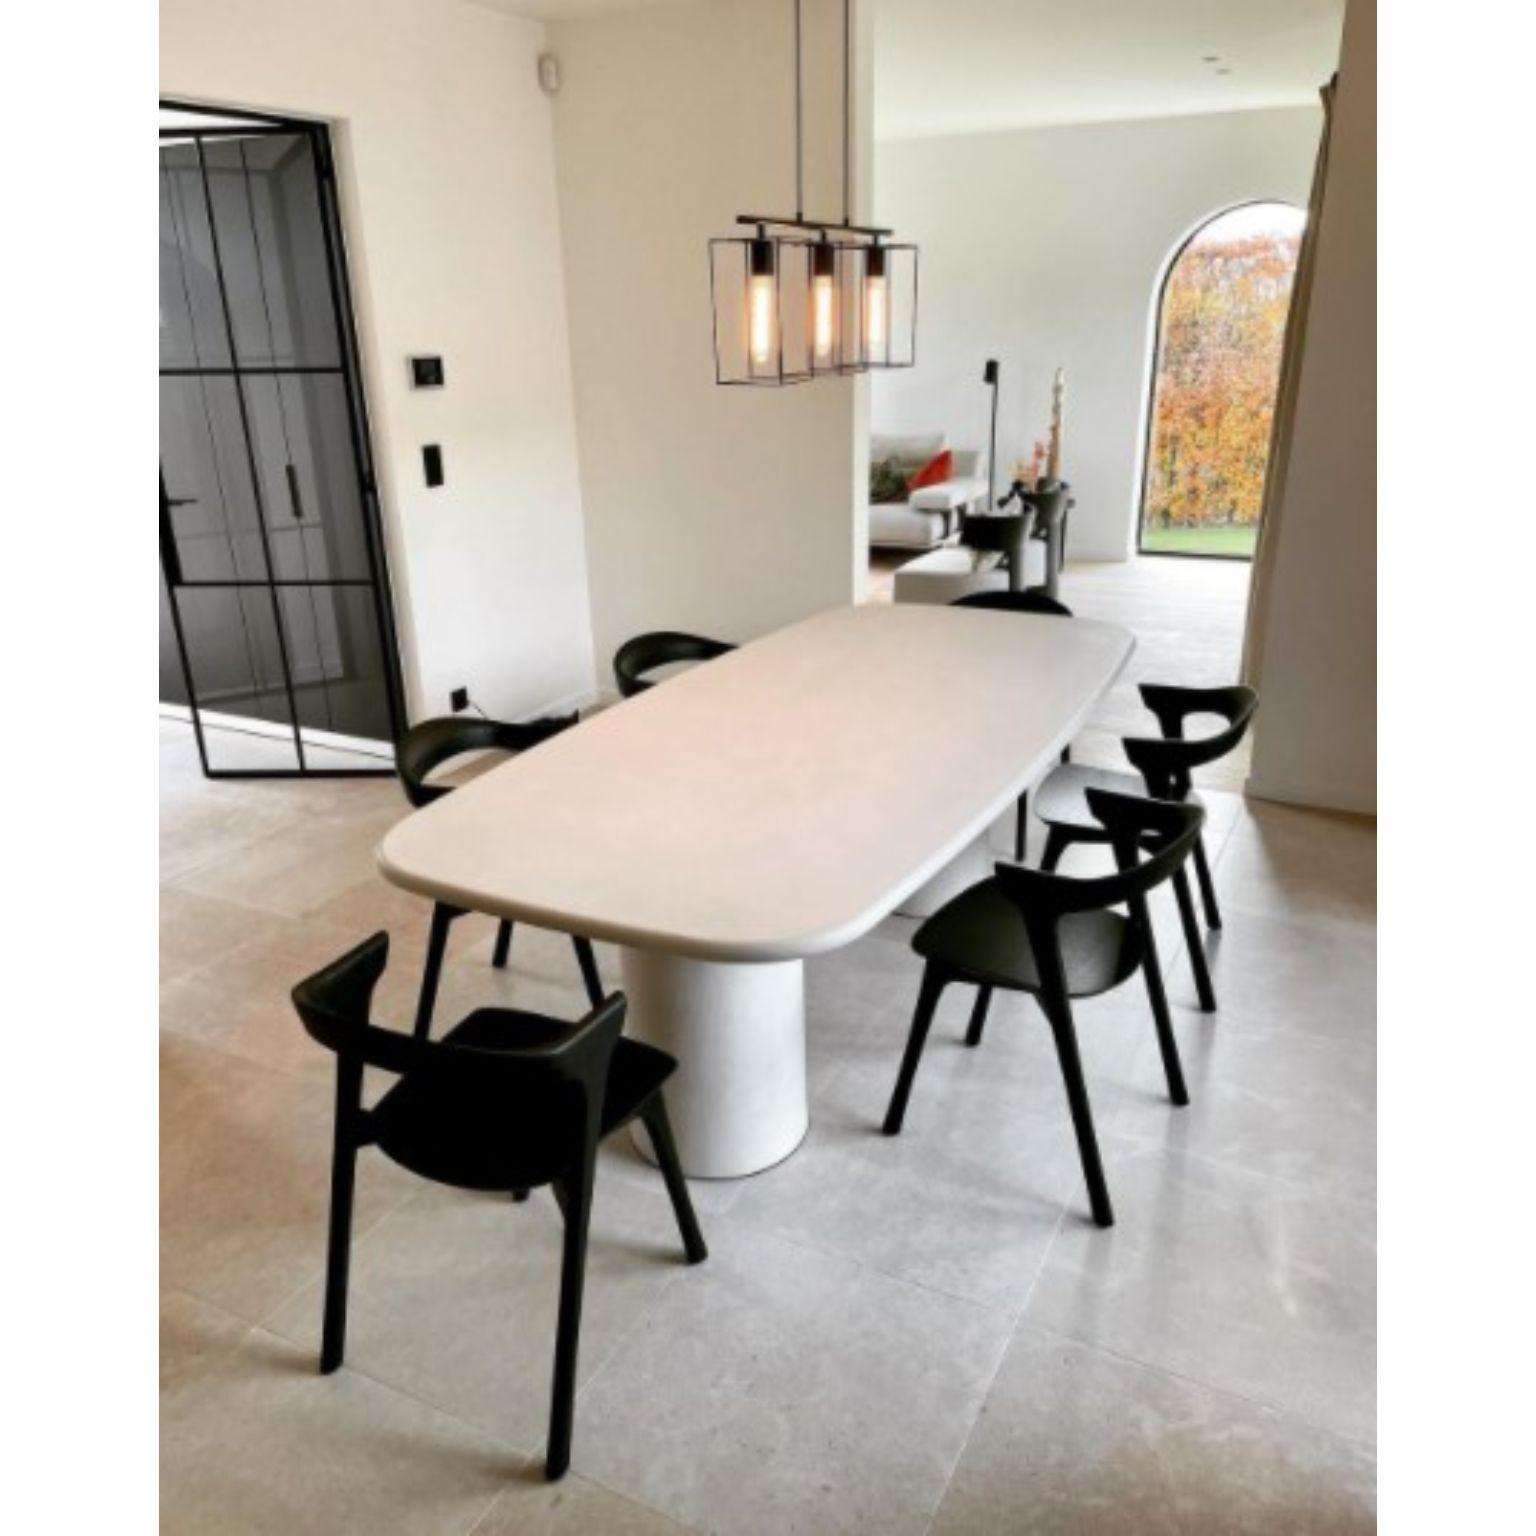 Barrel shape outdoor table by Philippe Colette
Dimensions: L 240 x W 110 x H 75 cm.
Materials: mineral lime plaster.

All shapes / sizes can be customized. Wide range of colors.

Our tables are in mineral lime plaster, unlike mortex, they are very